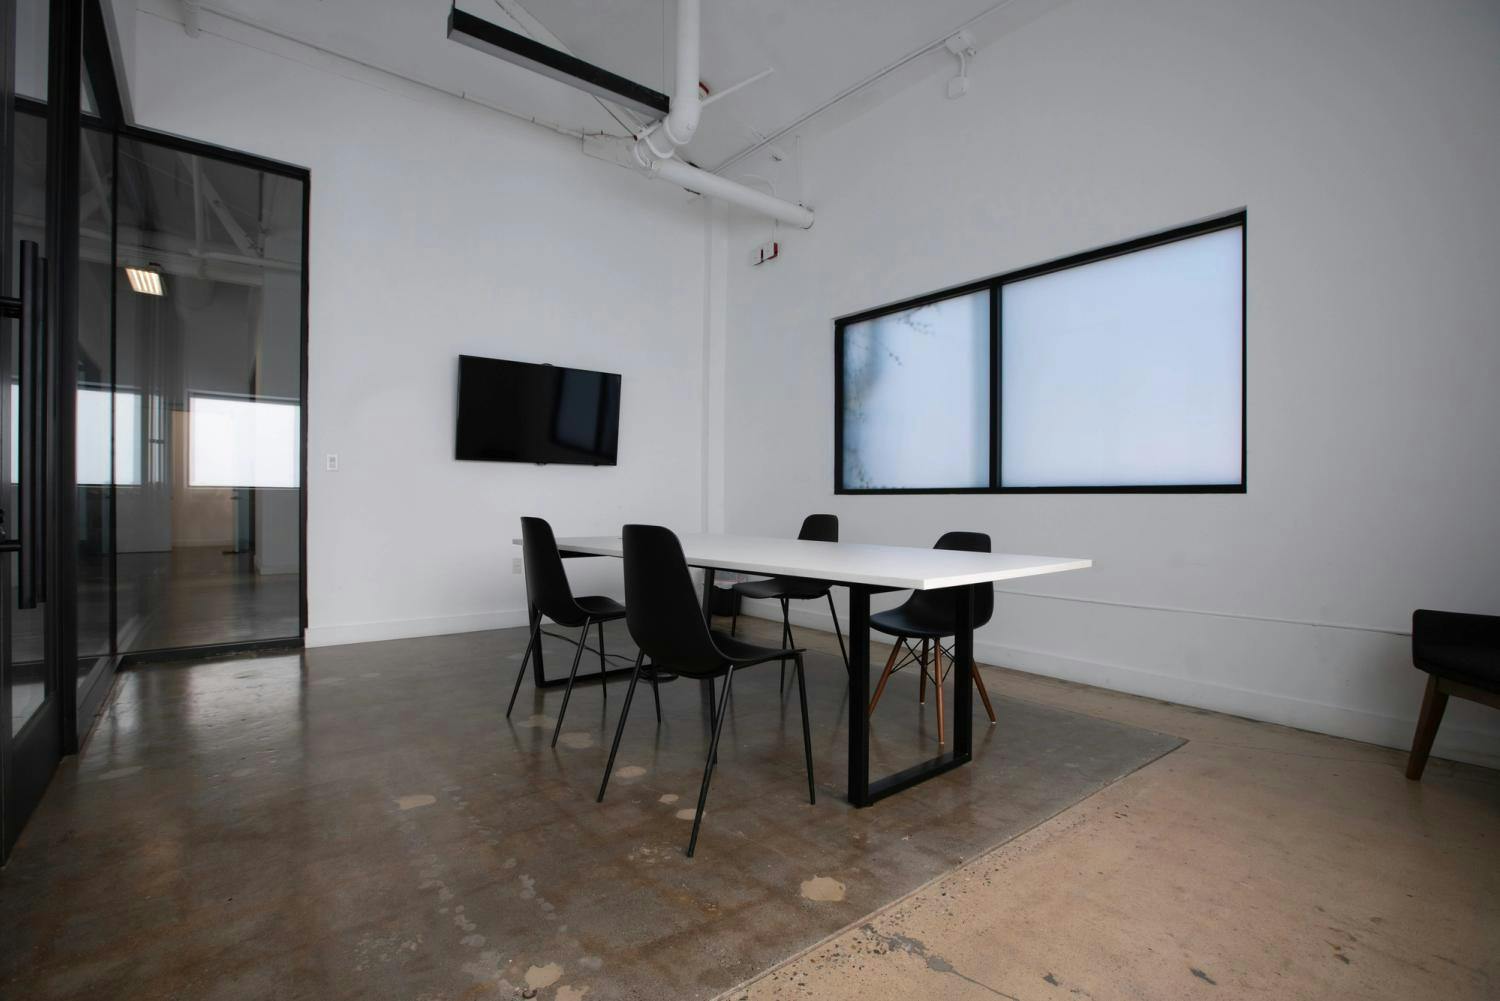 A modern meeting room with a white table, black chairs, and a wall-mounted TV, featuring an industrial-chic interior with glass doors and concrete floors.